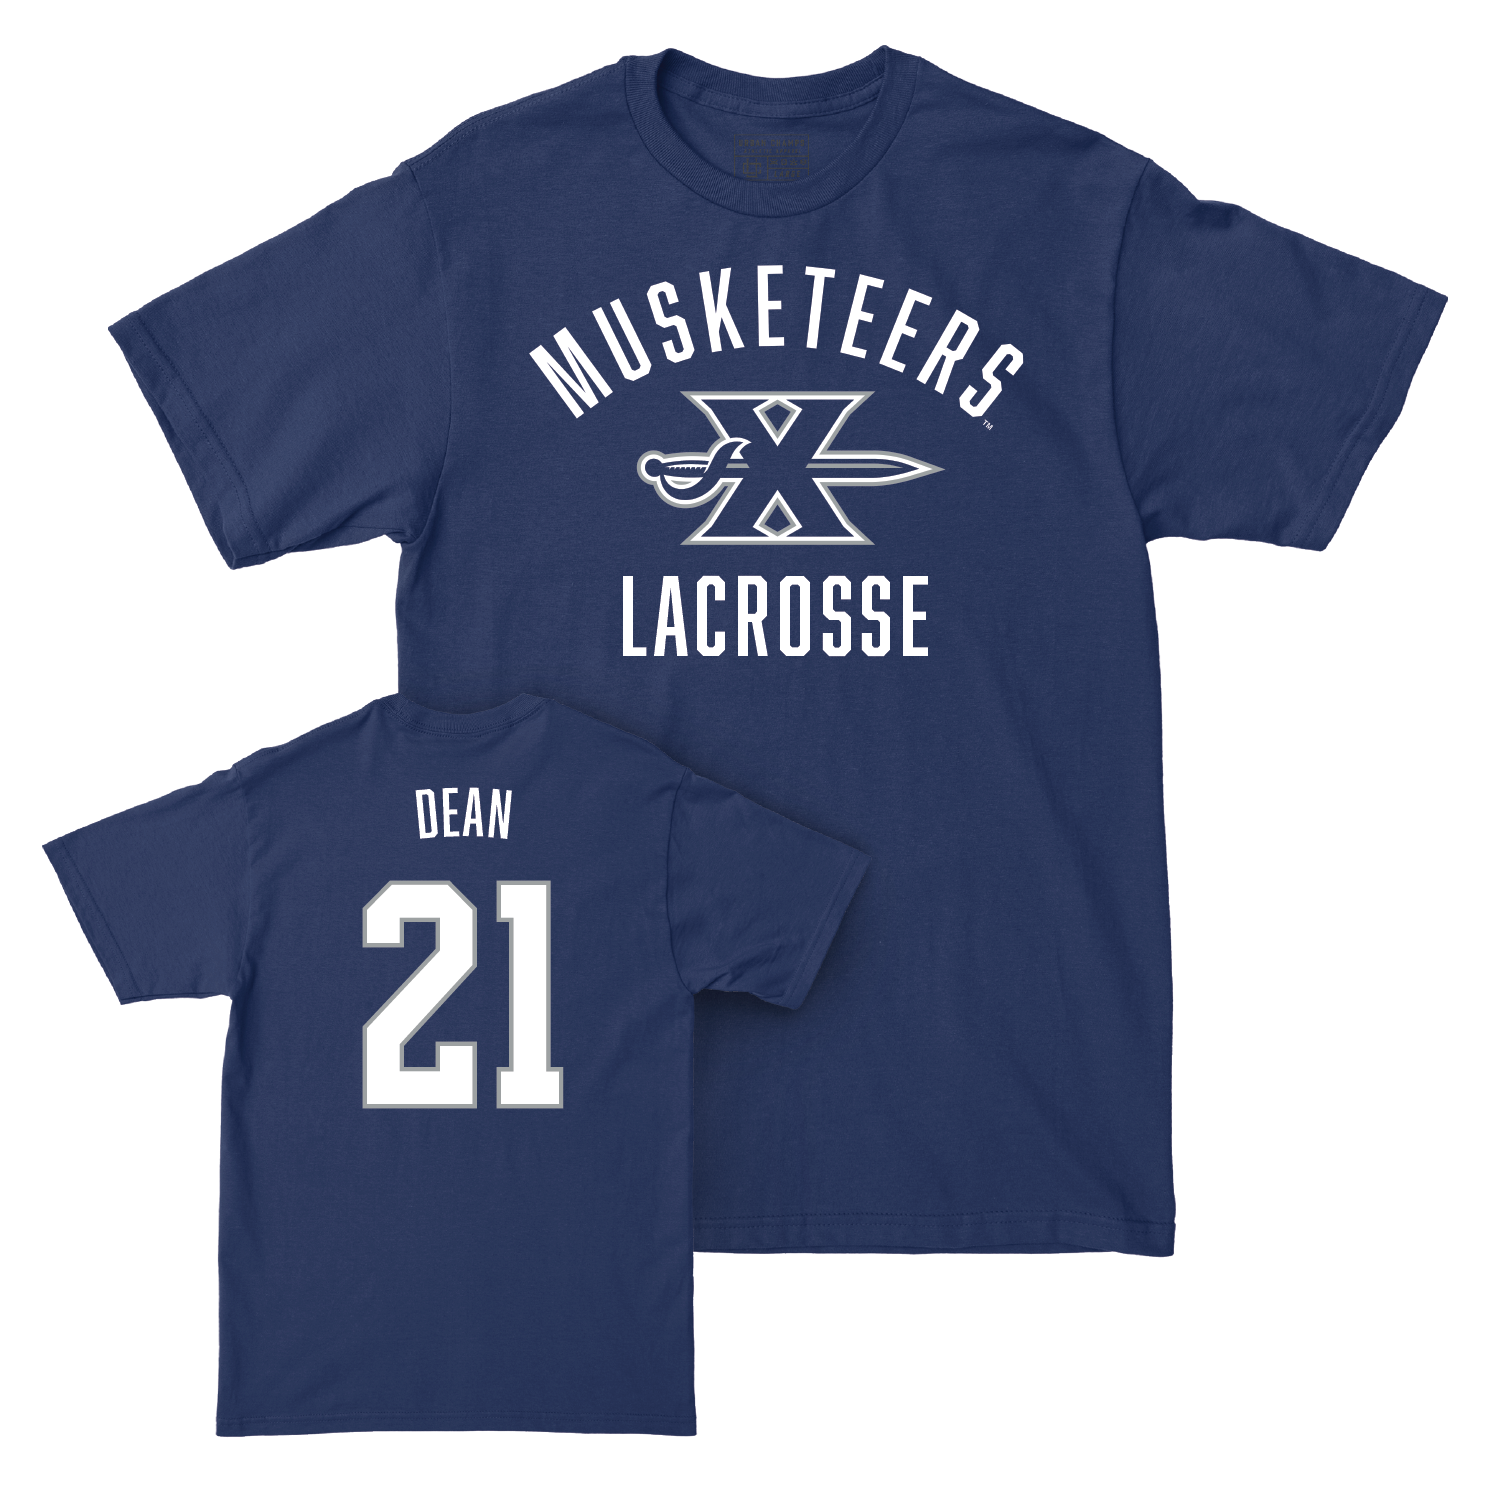 Women's Lacrosse Navy Classic Tee - Aubrey Dean Youth Small